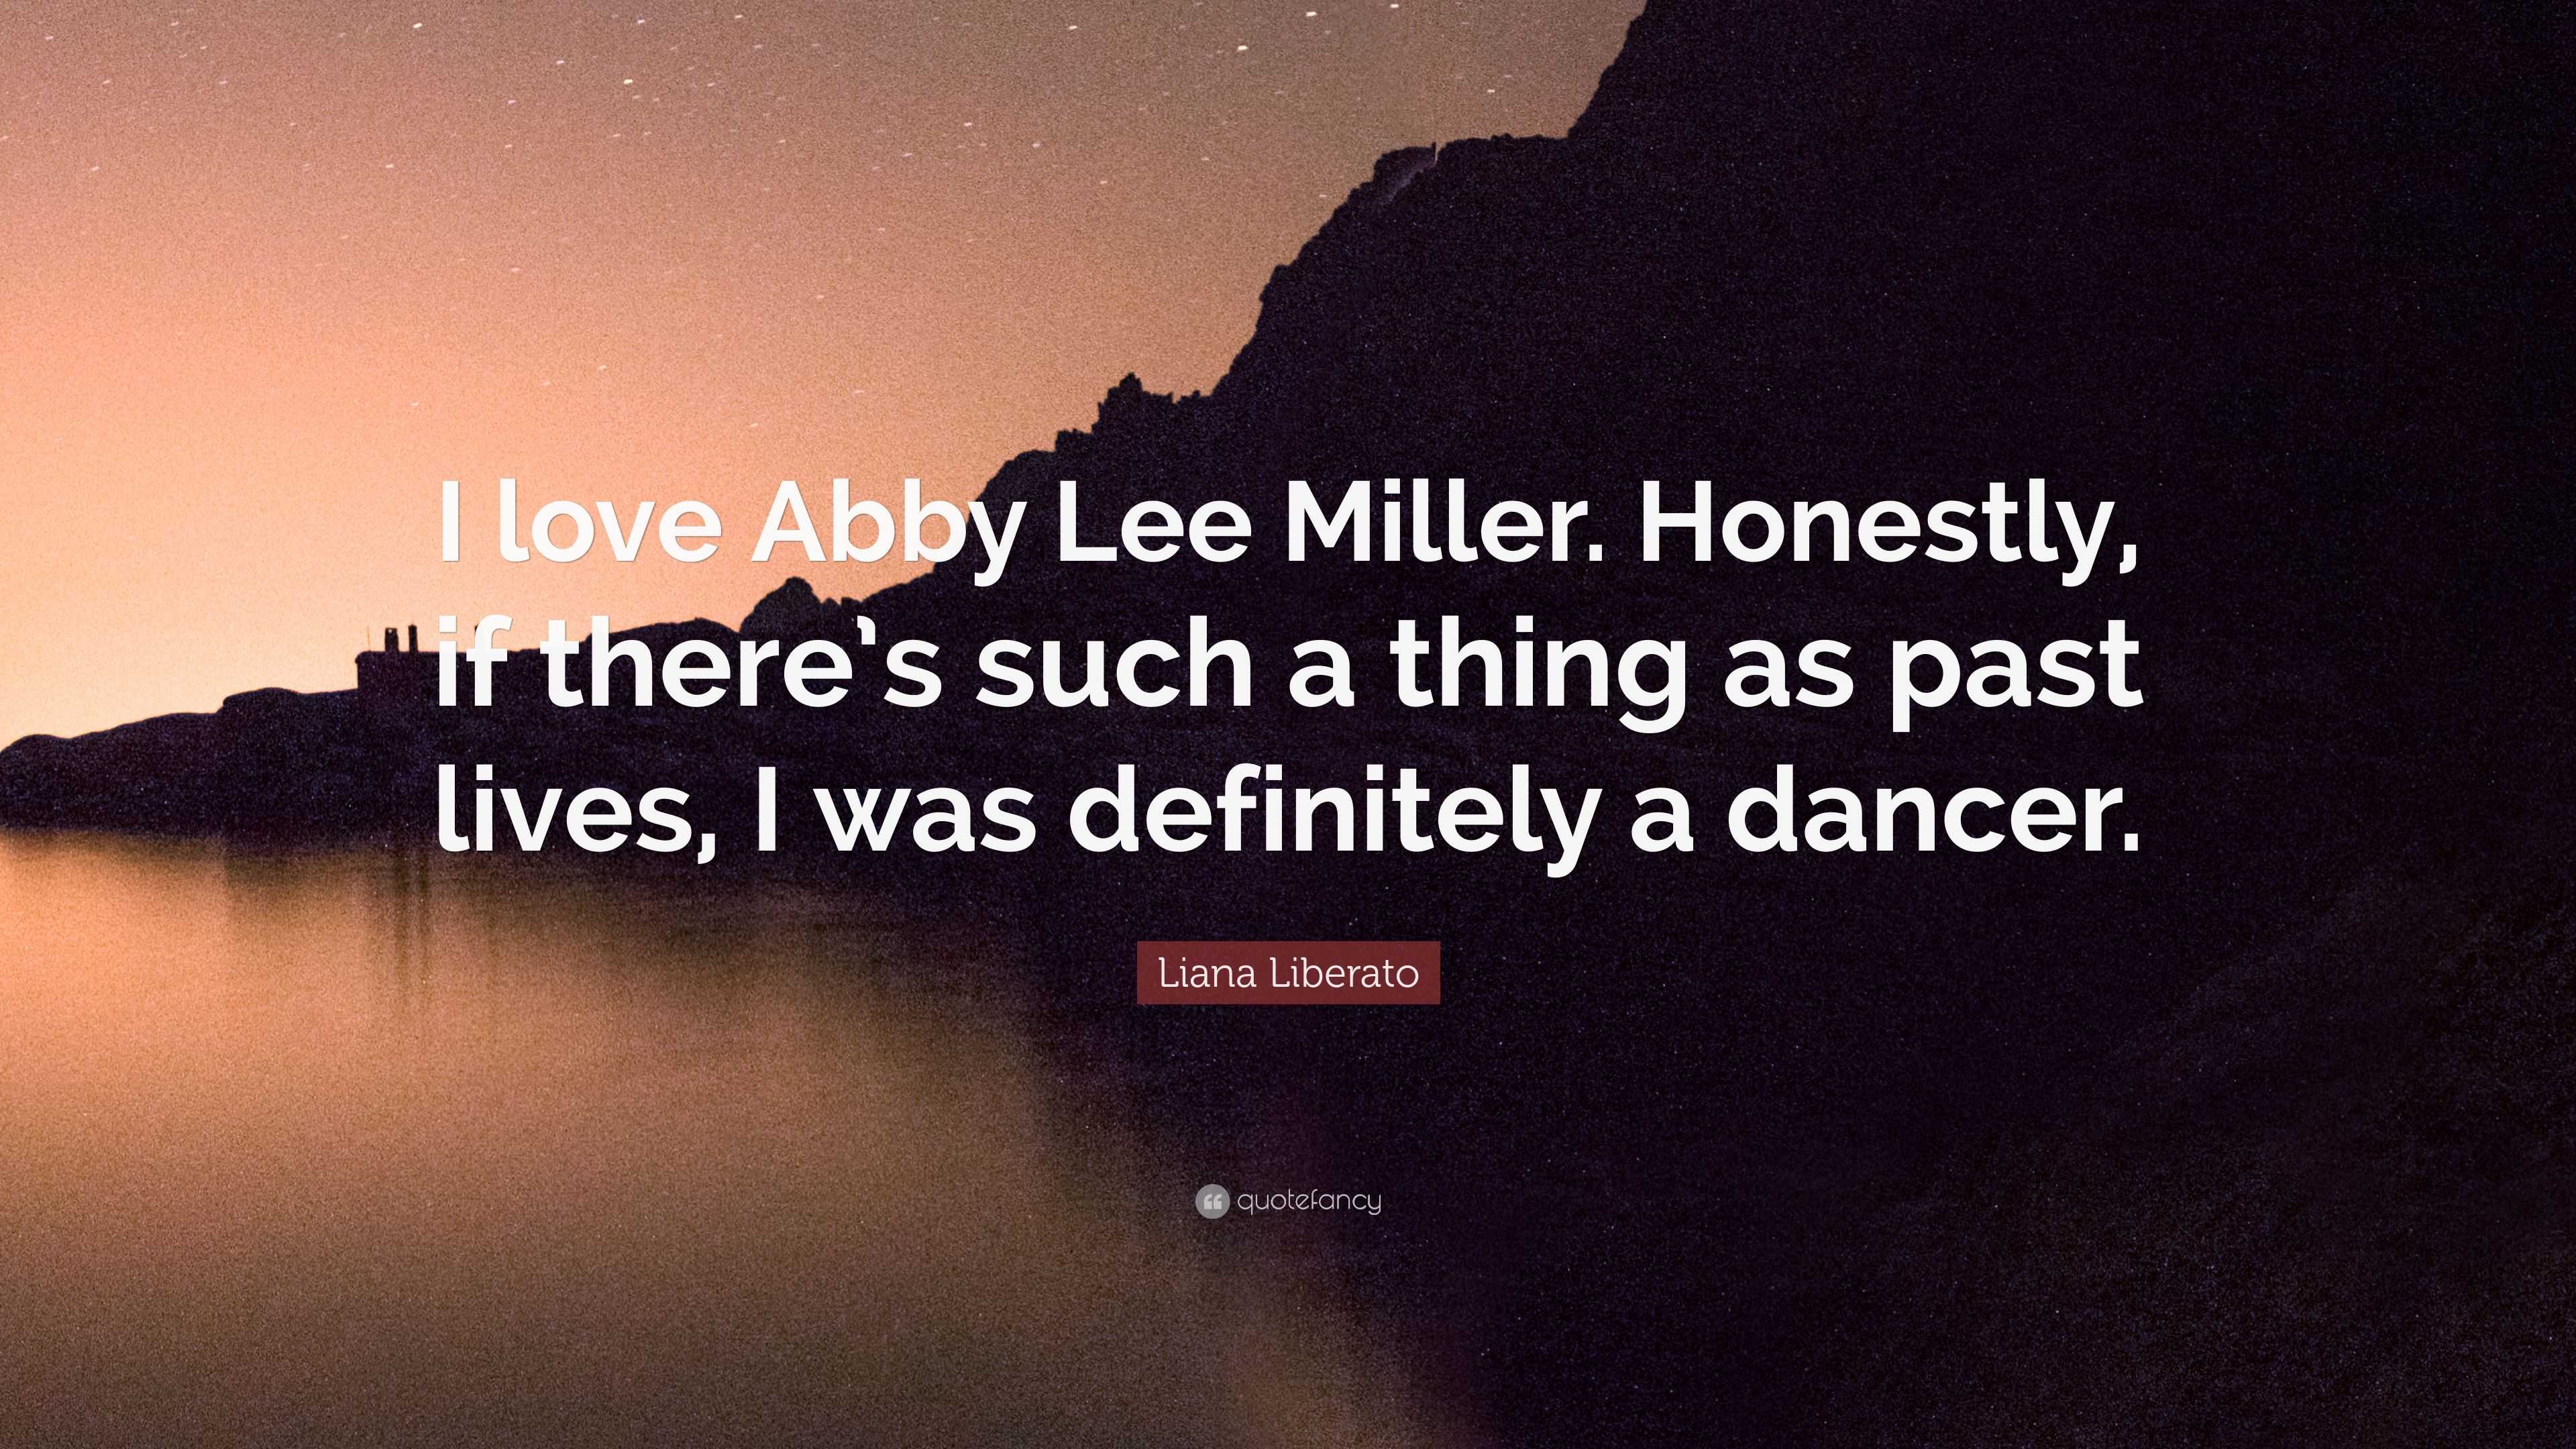 Liana Liberato Quote: “I love Abby Lee Miller. Honestly, if there's such a  thing as past